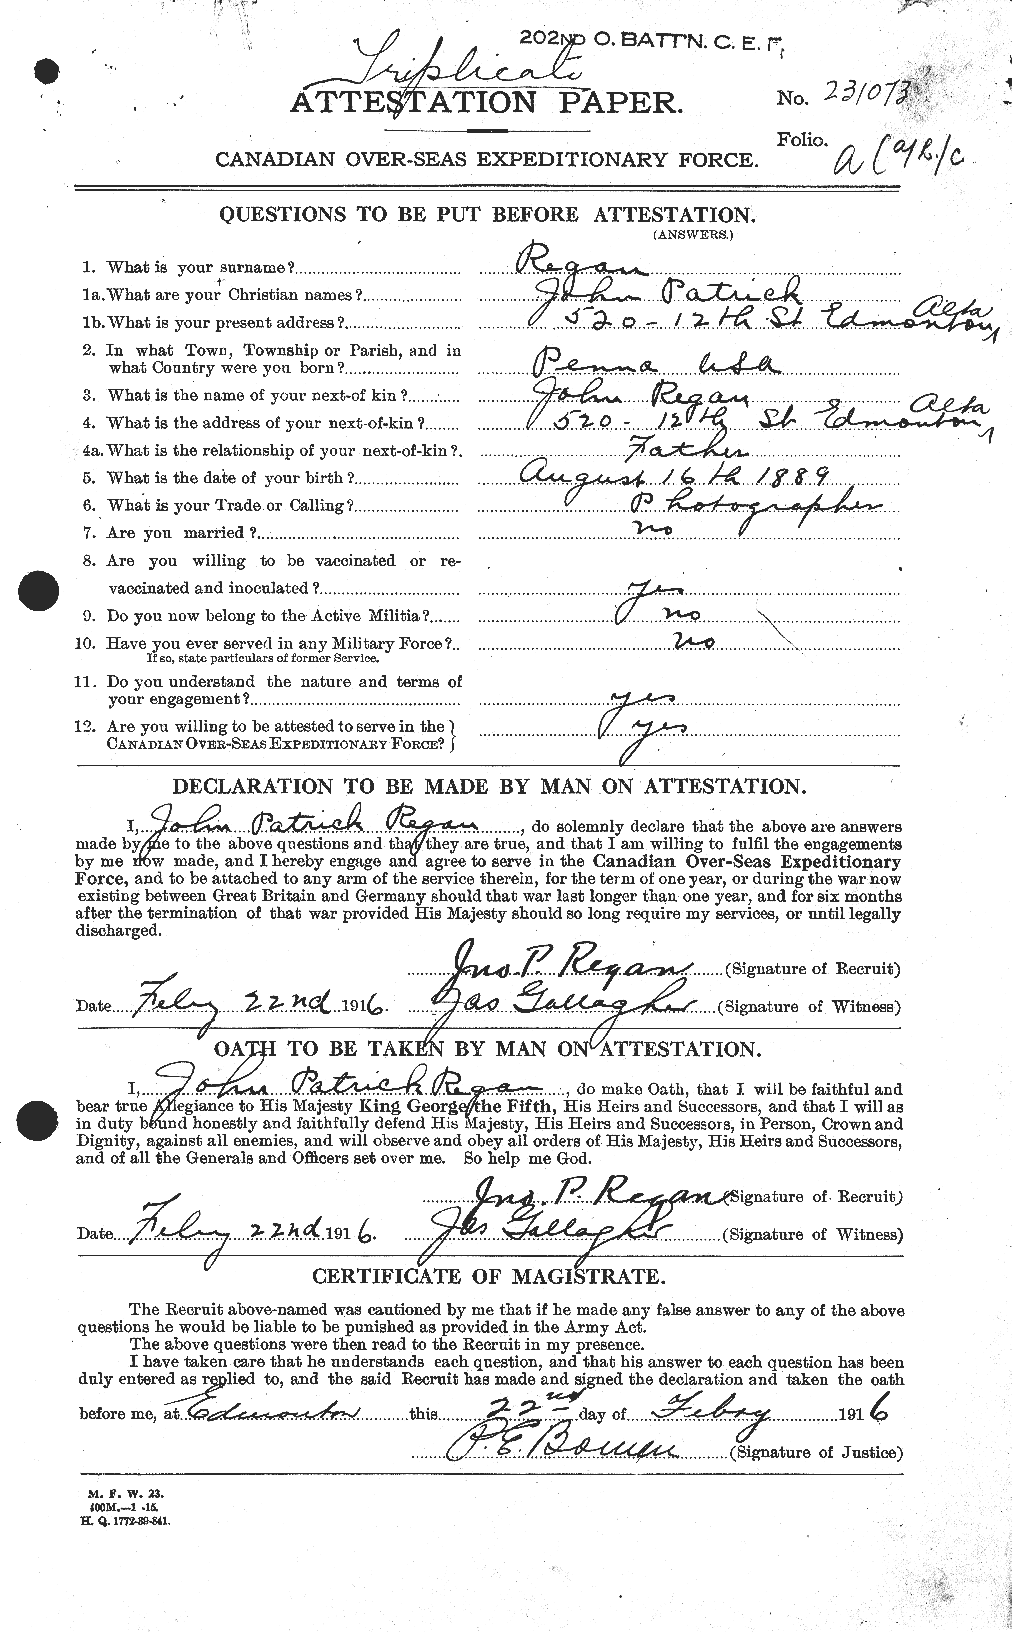 Personnel Records of the First World War - CEF 597591a